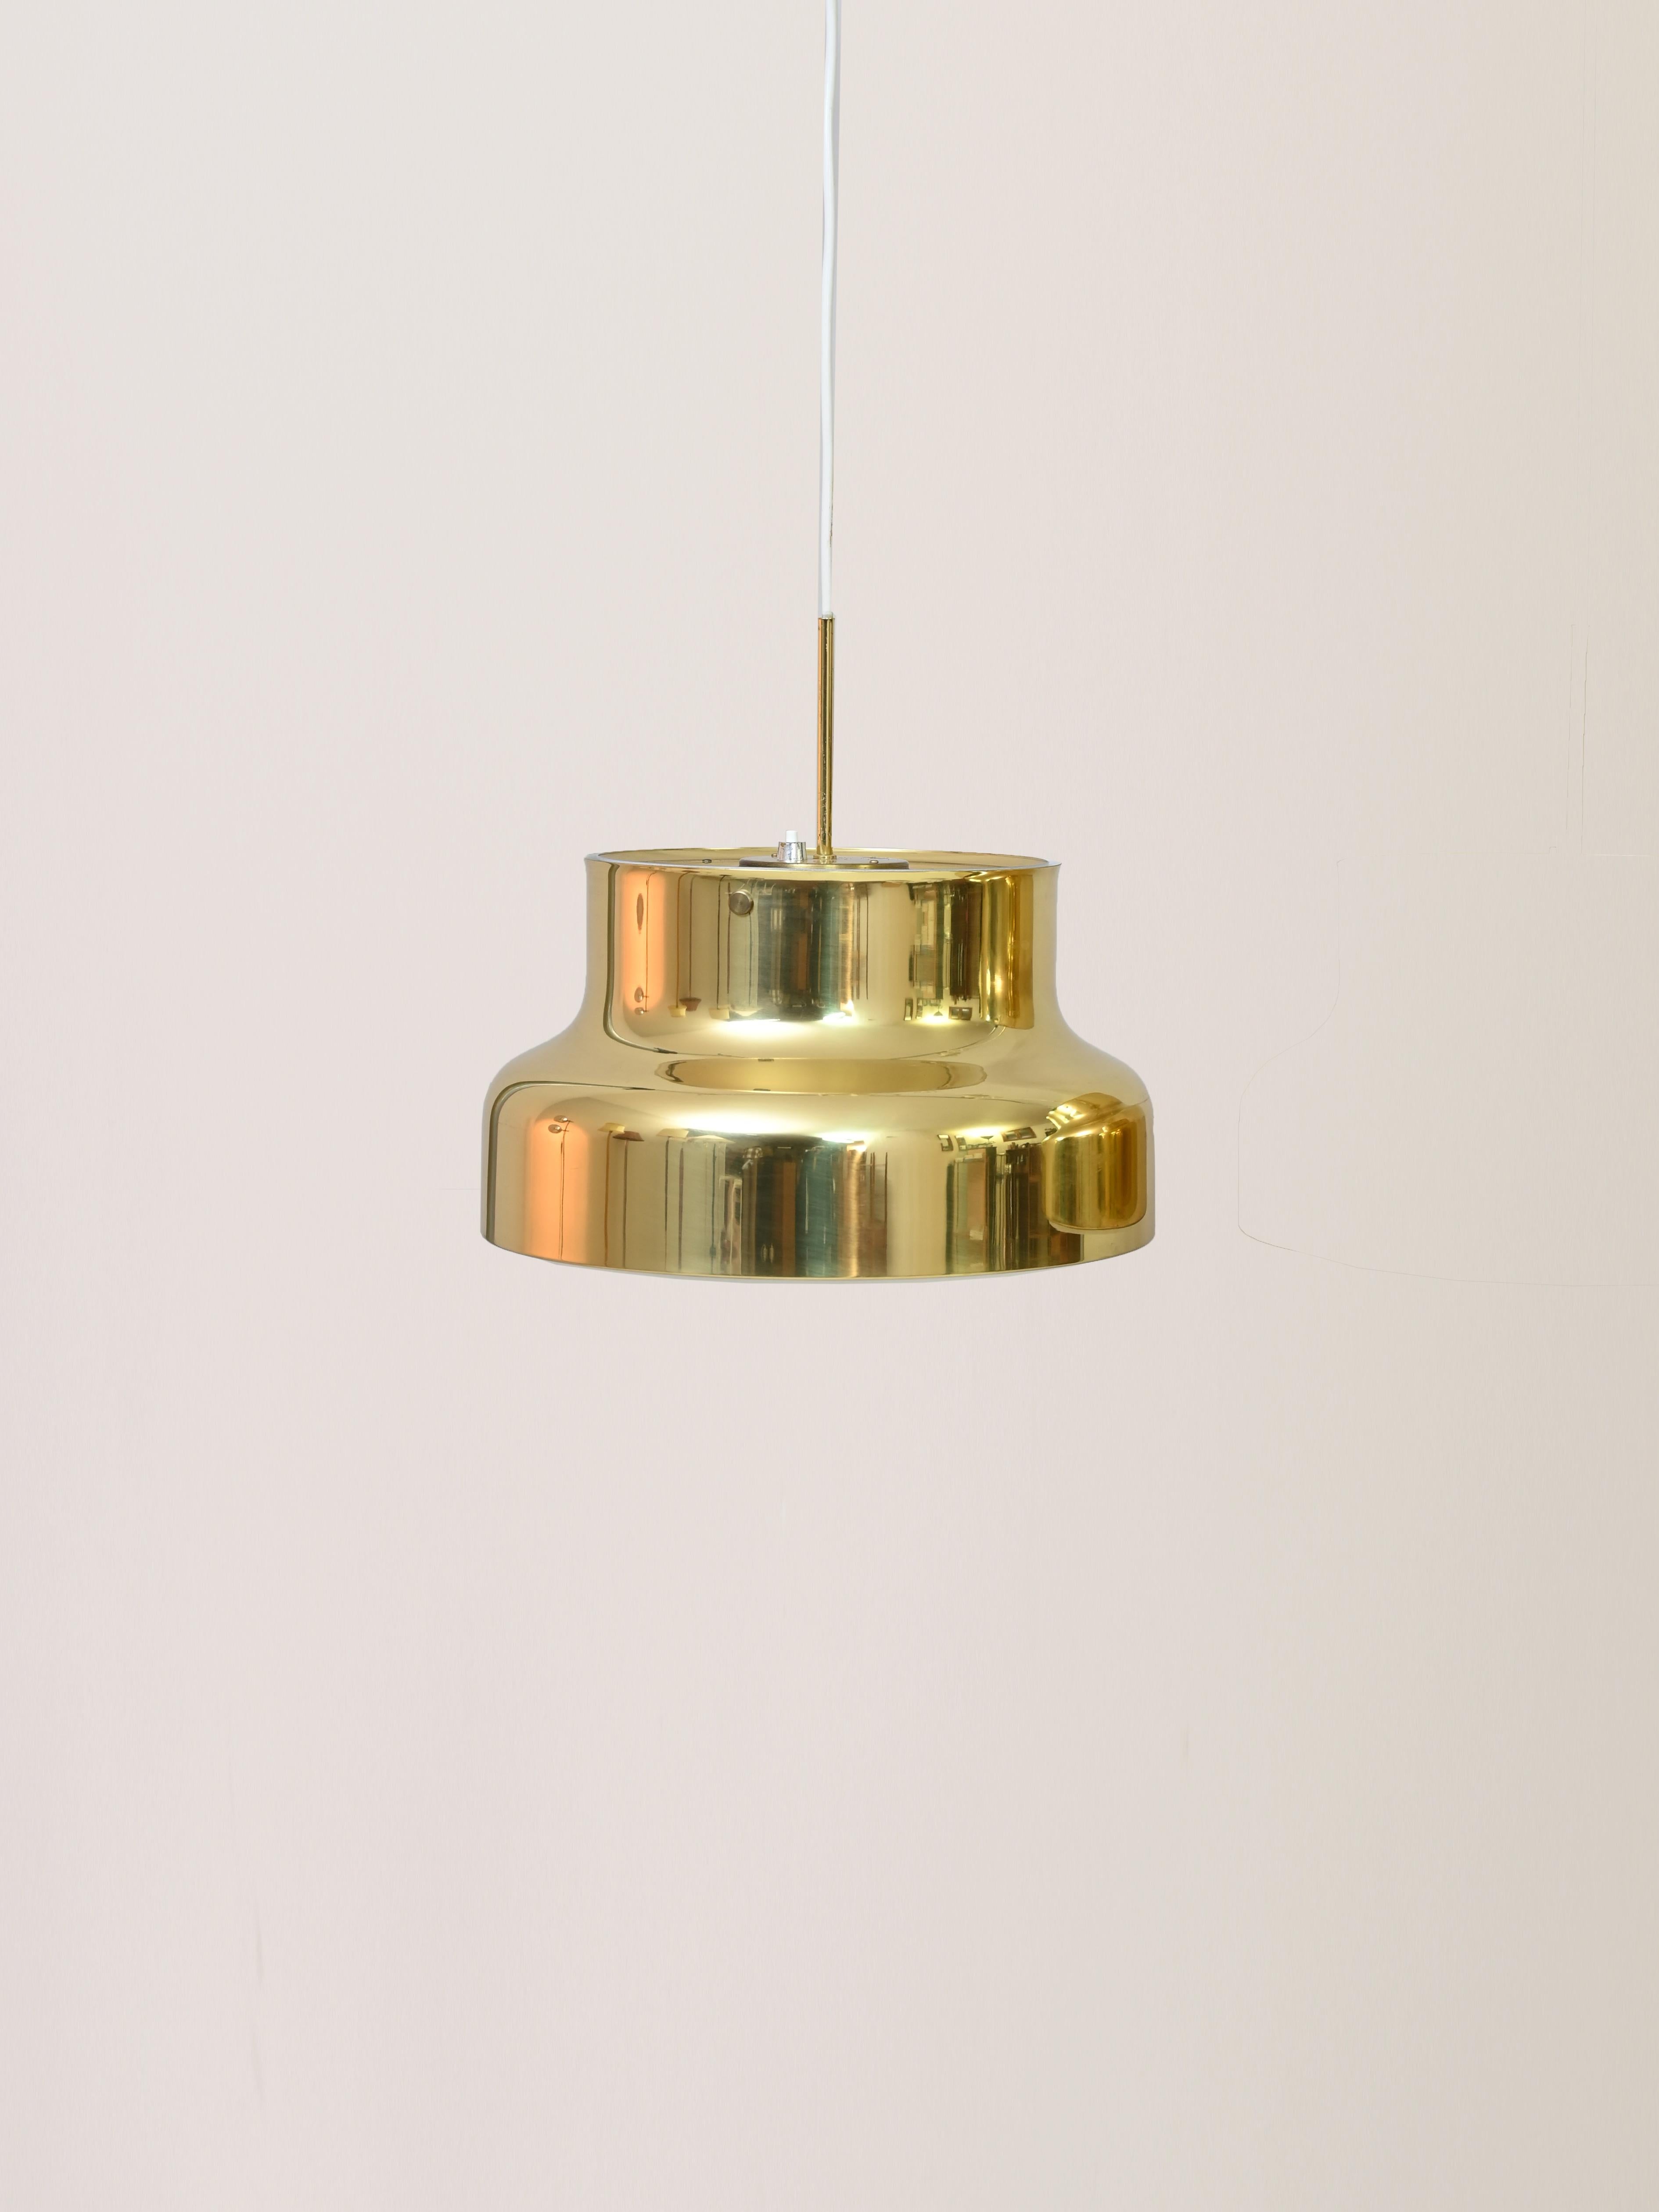 Classic 'Golden Edition' Bumling model by Anders Pehrson for Atelje Lyktan.

A pair of iconic Scandinavian lamps from the 1960s in brass.

In good condition.

The electrical system is vintage and original. It may show signs of age.

Please pay